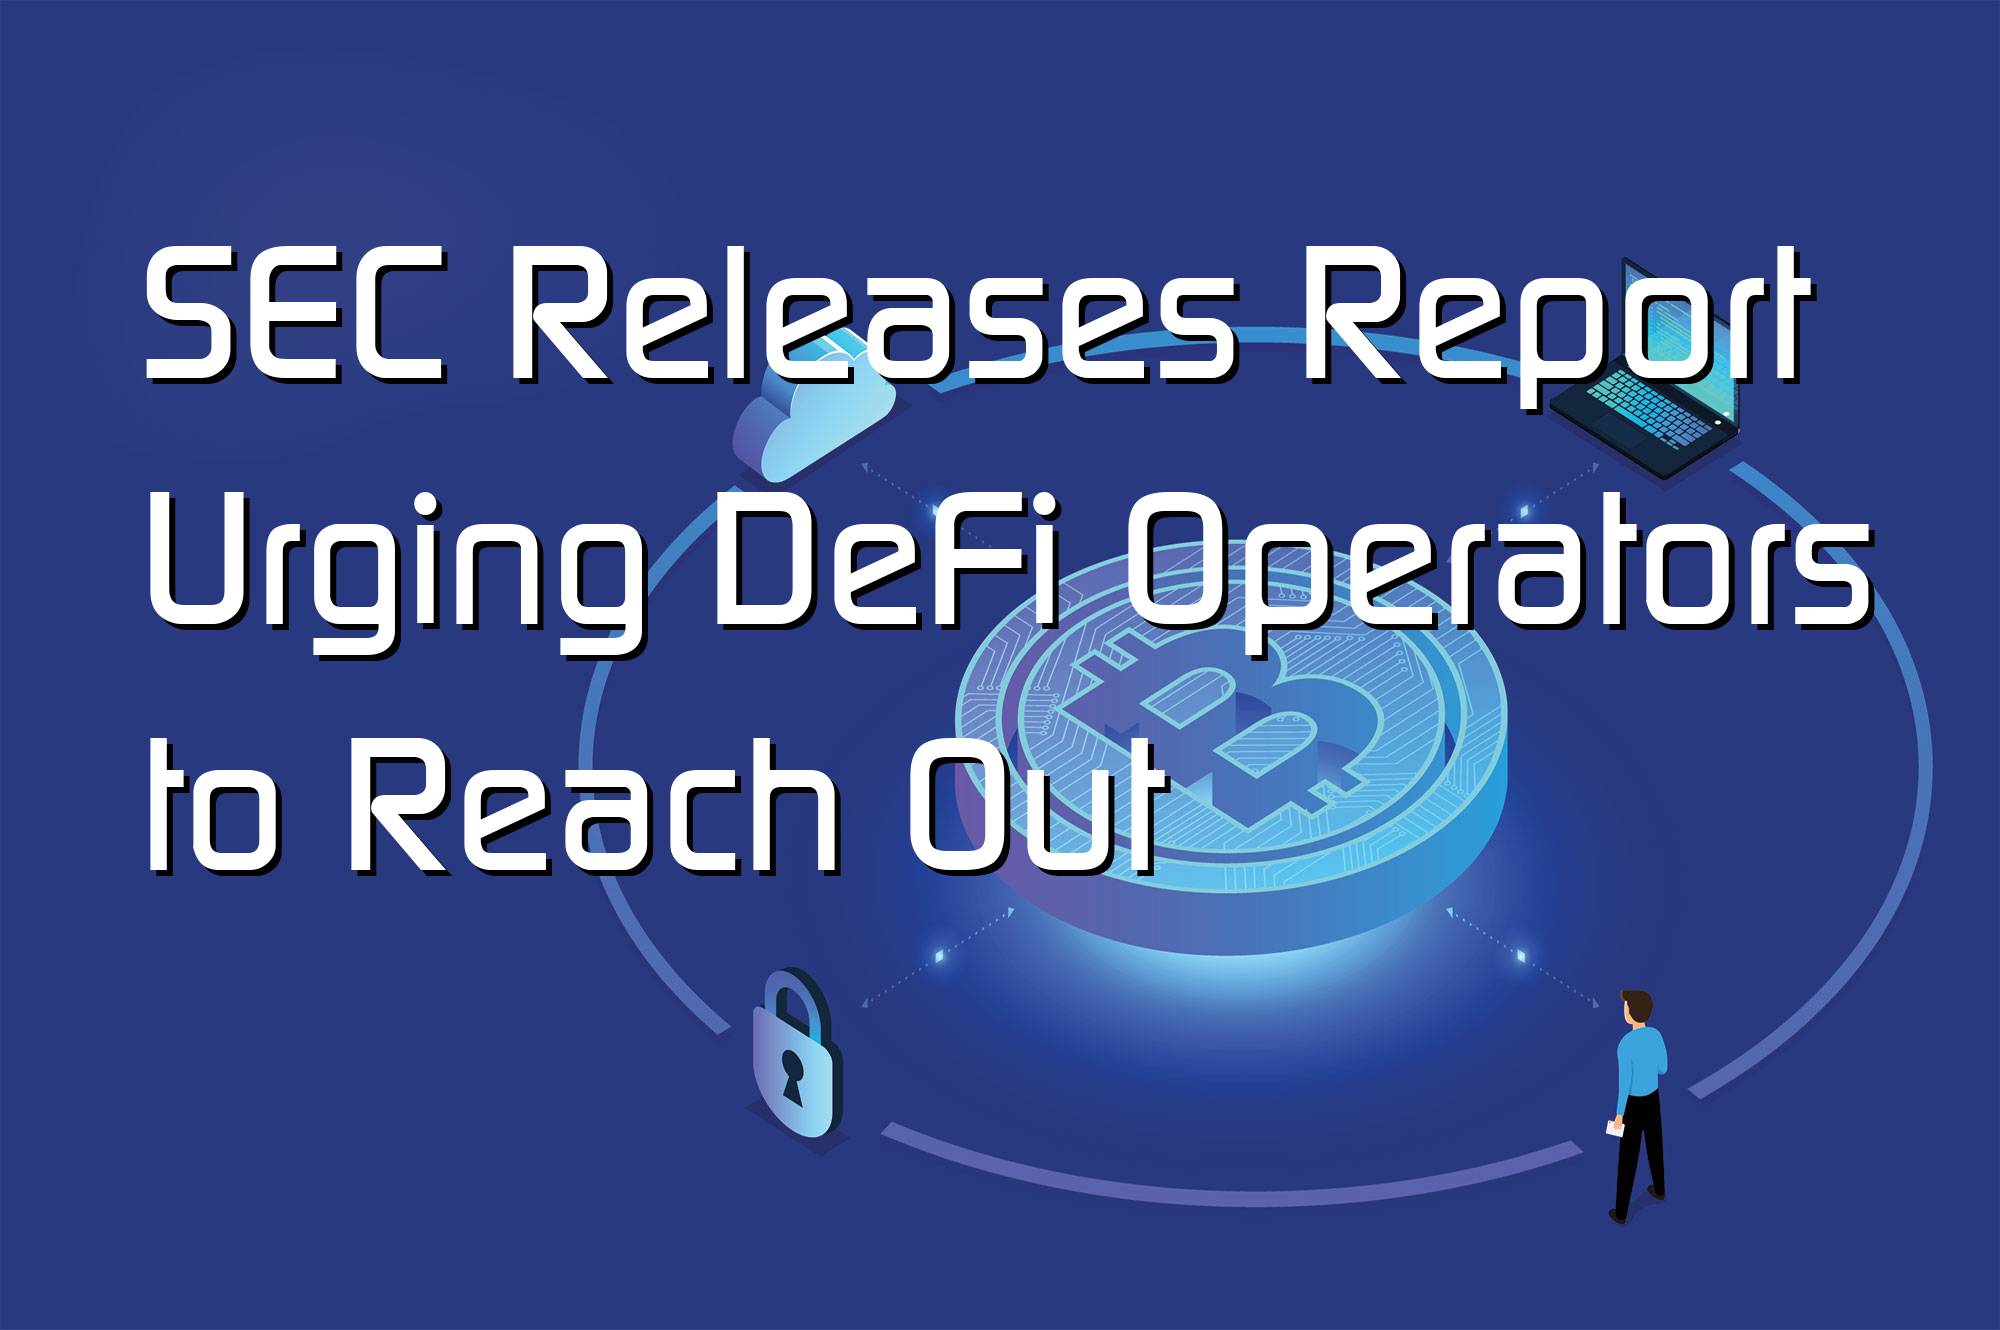 @$66505: SEC Releases Report Urging DeFi Operators to Reach Out